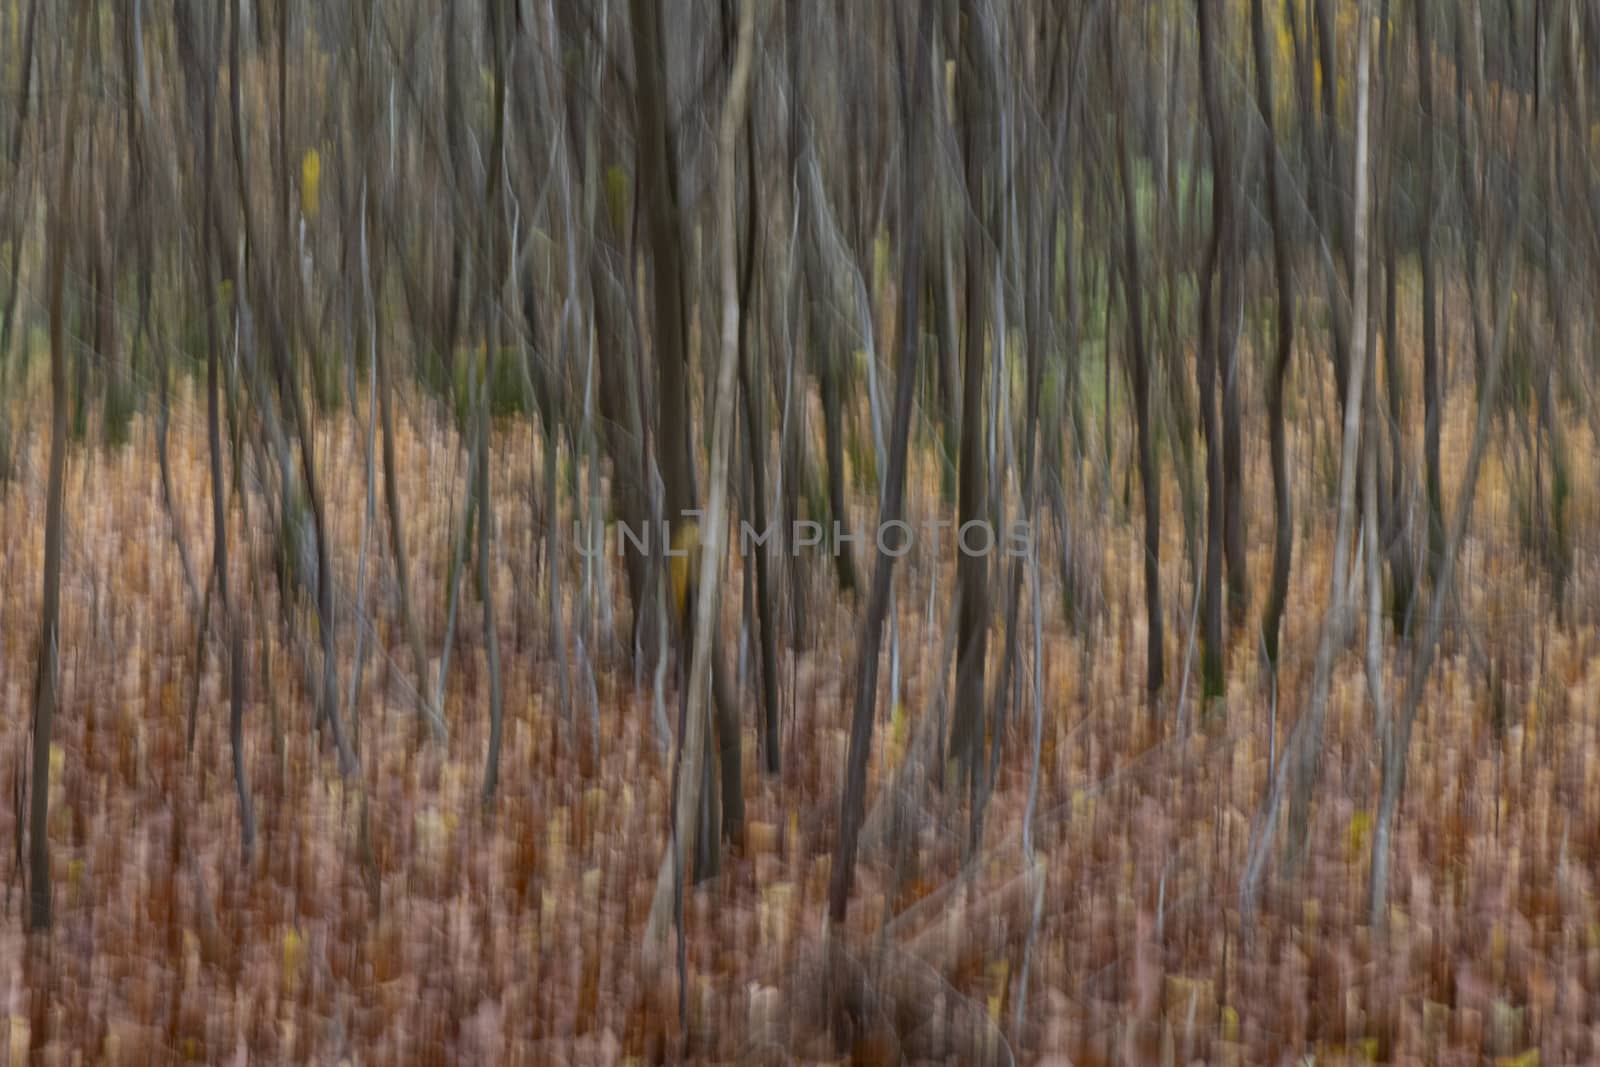 Abstract autumn trees in a forest
 by Tofotografie